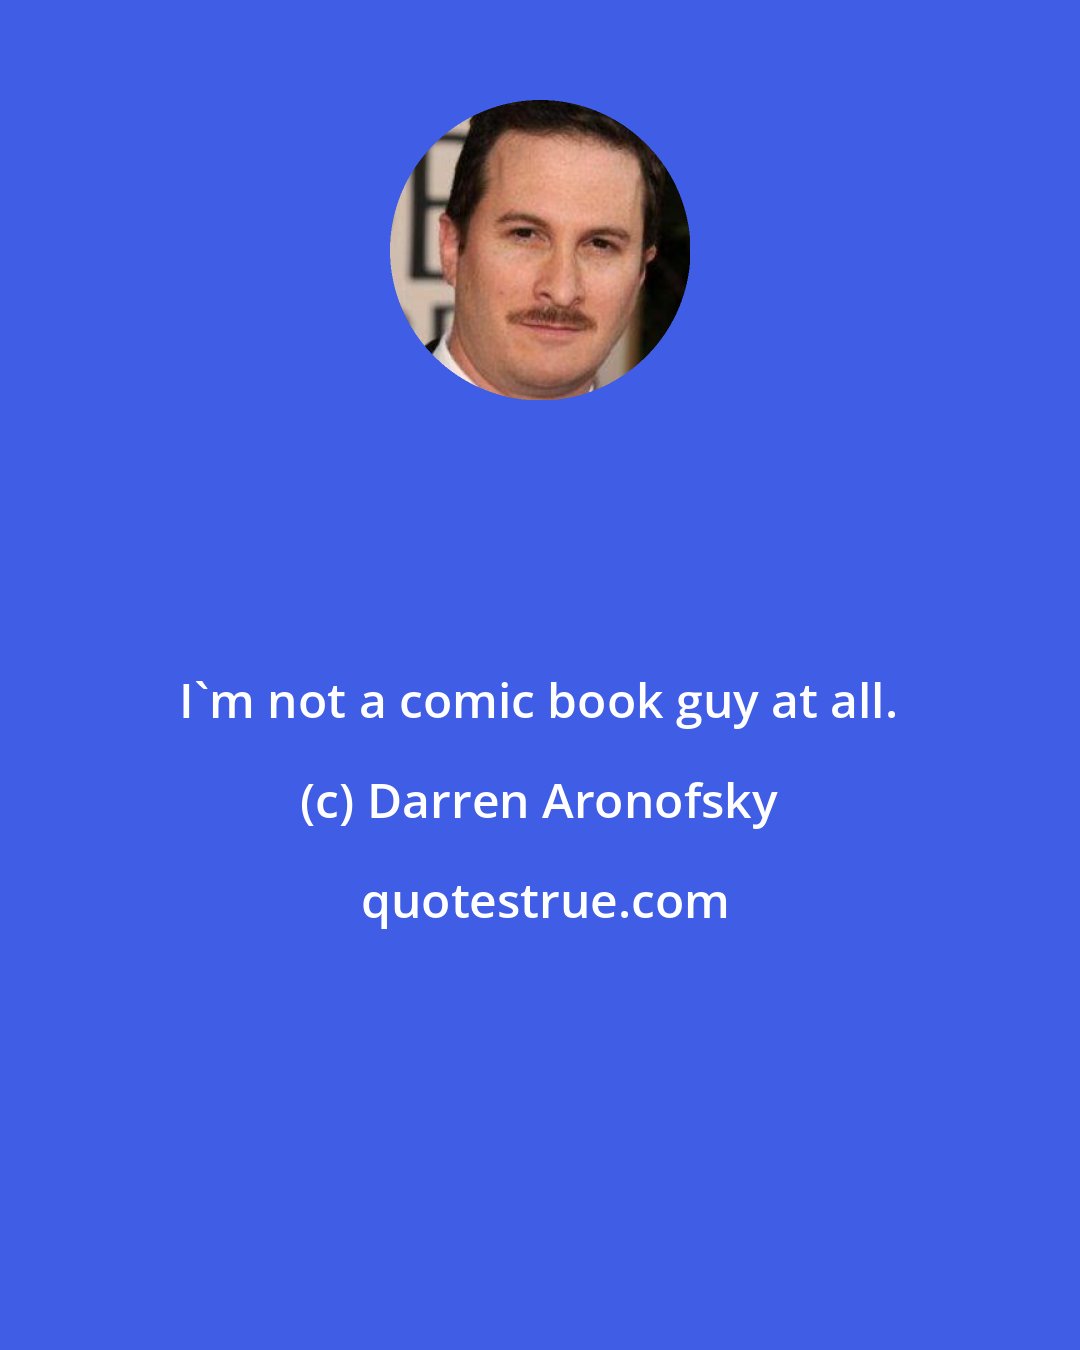 Darren Aronofsky: I'm not a comic book guy at all.